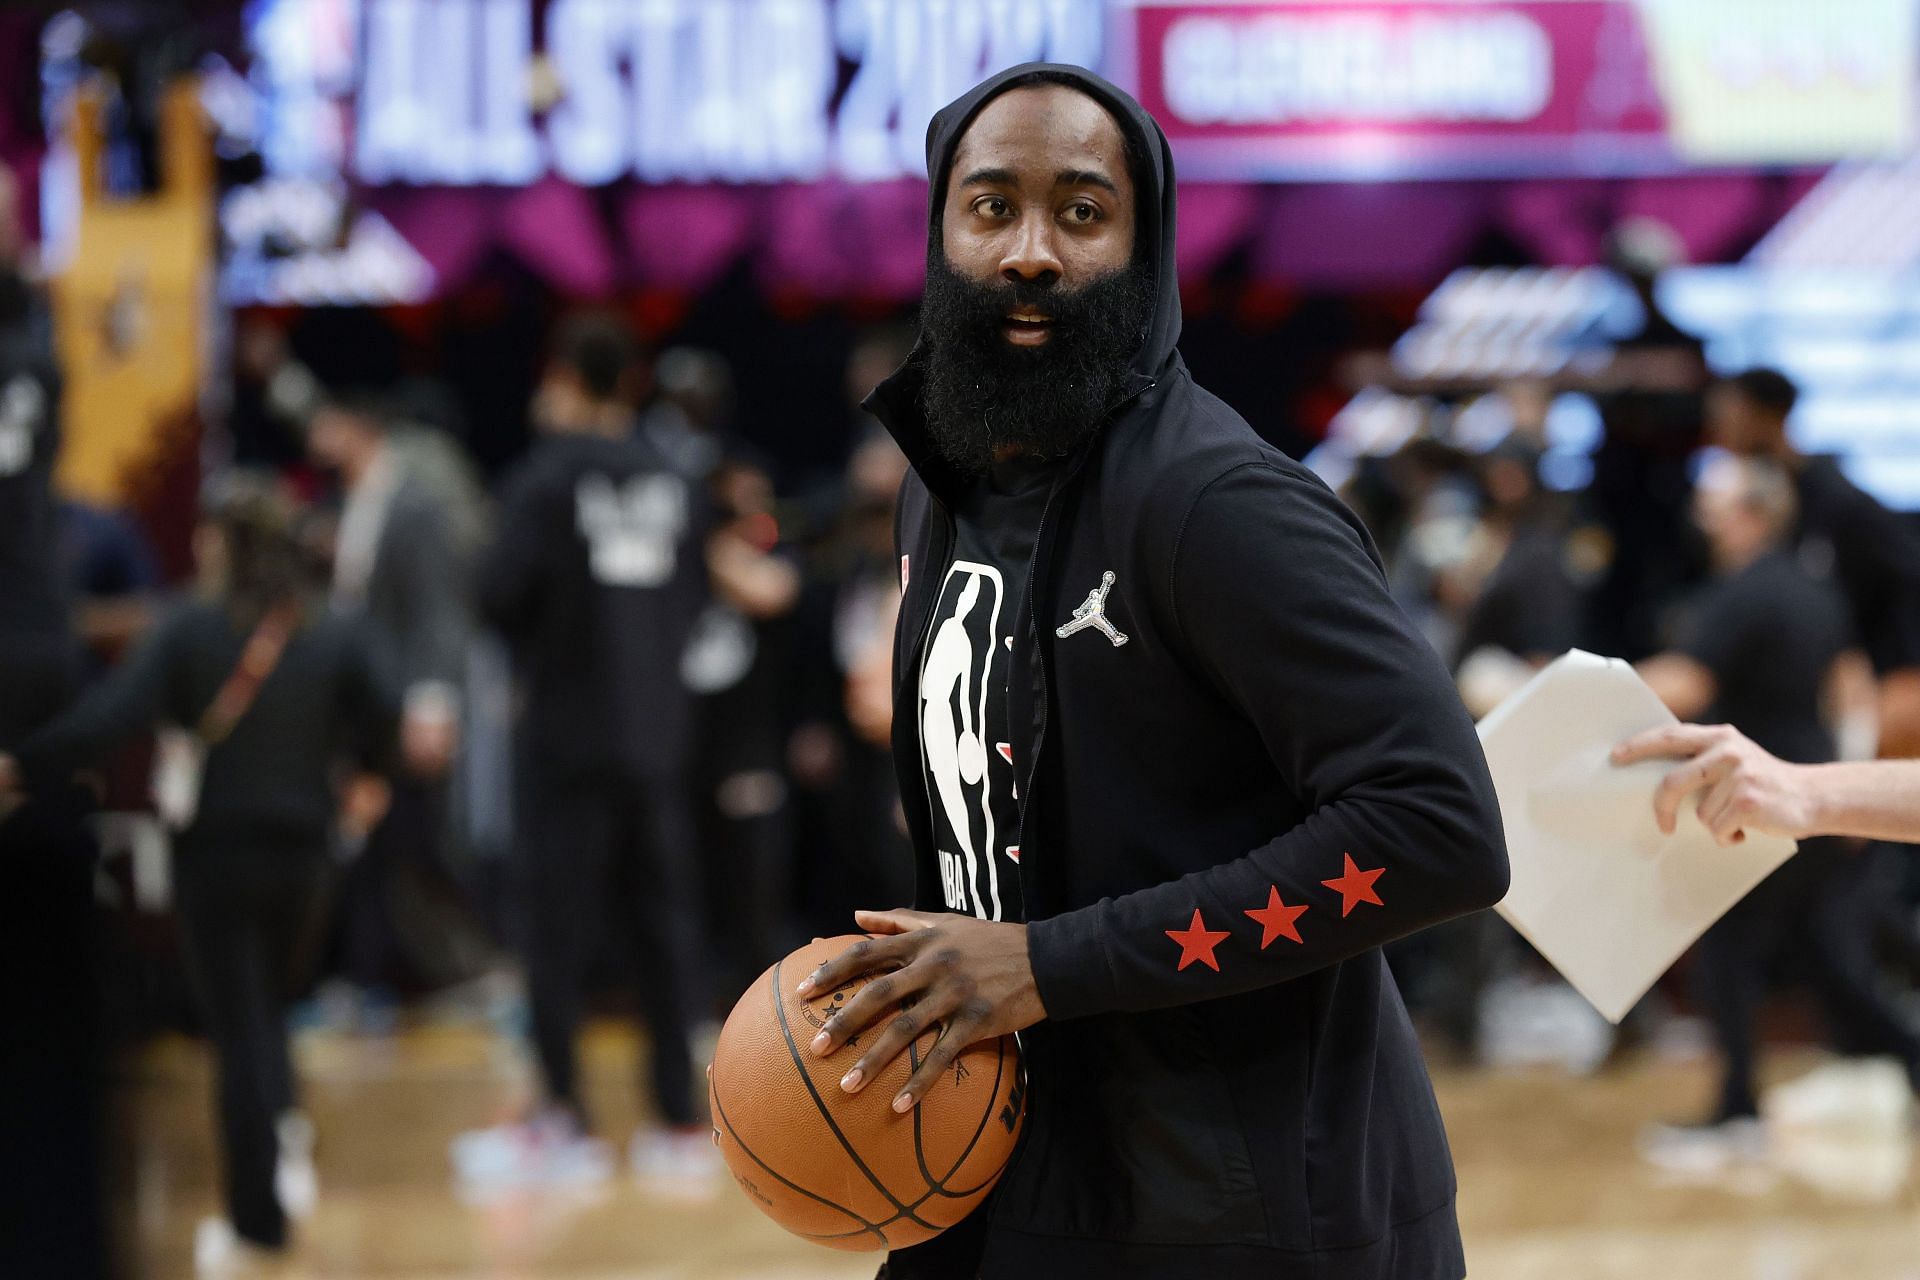 Enter caption Enter caption James Harden of Team LeBron warms up before the All-Star Game on Sunday in Cleveland, Ohio.